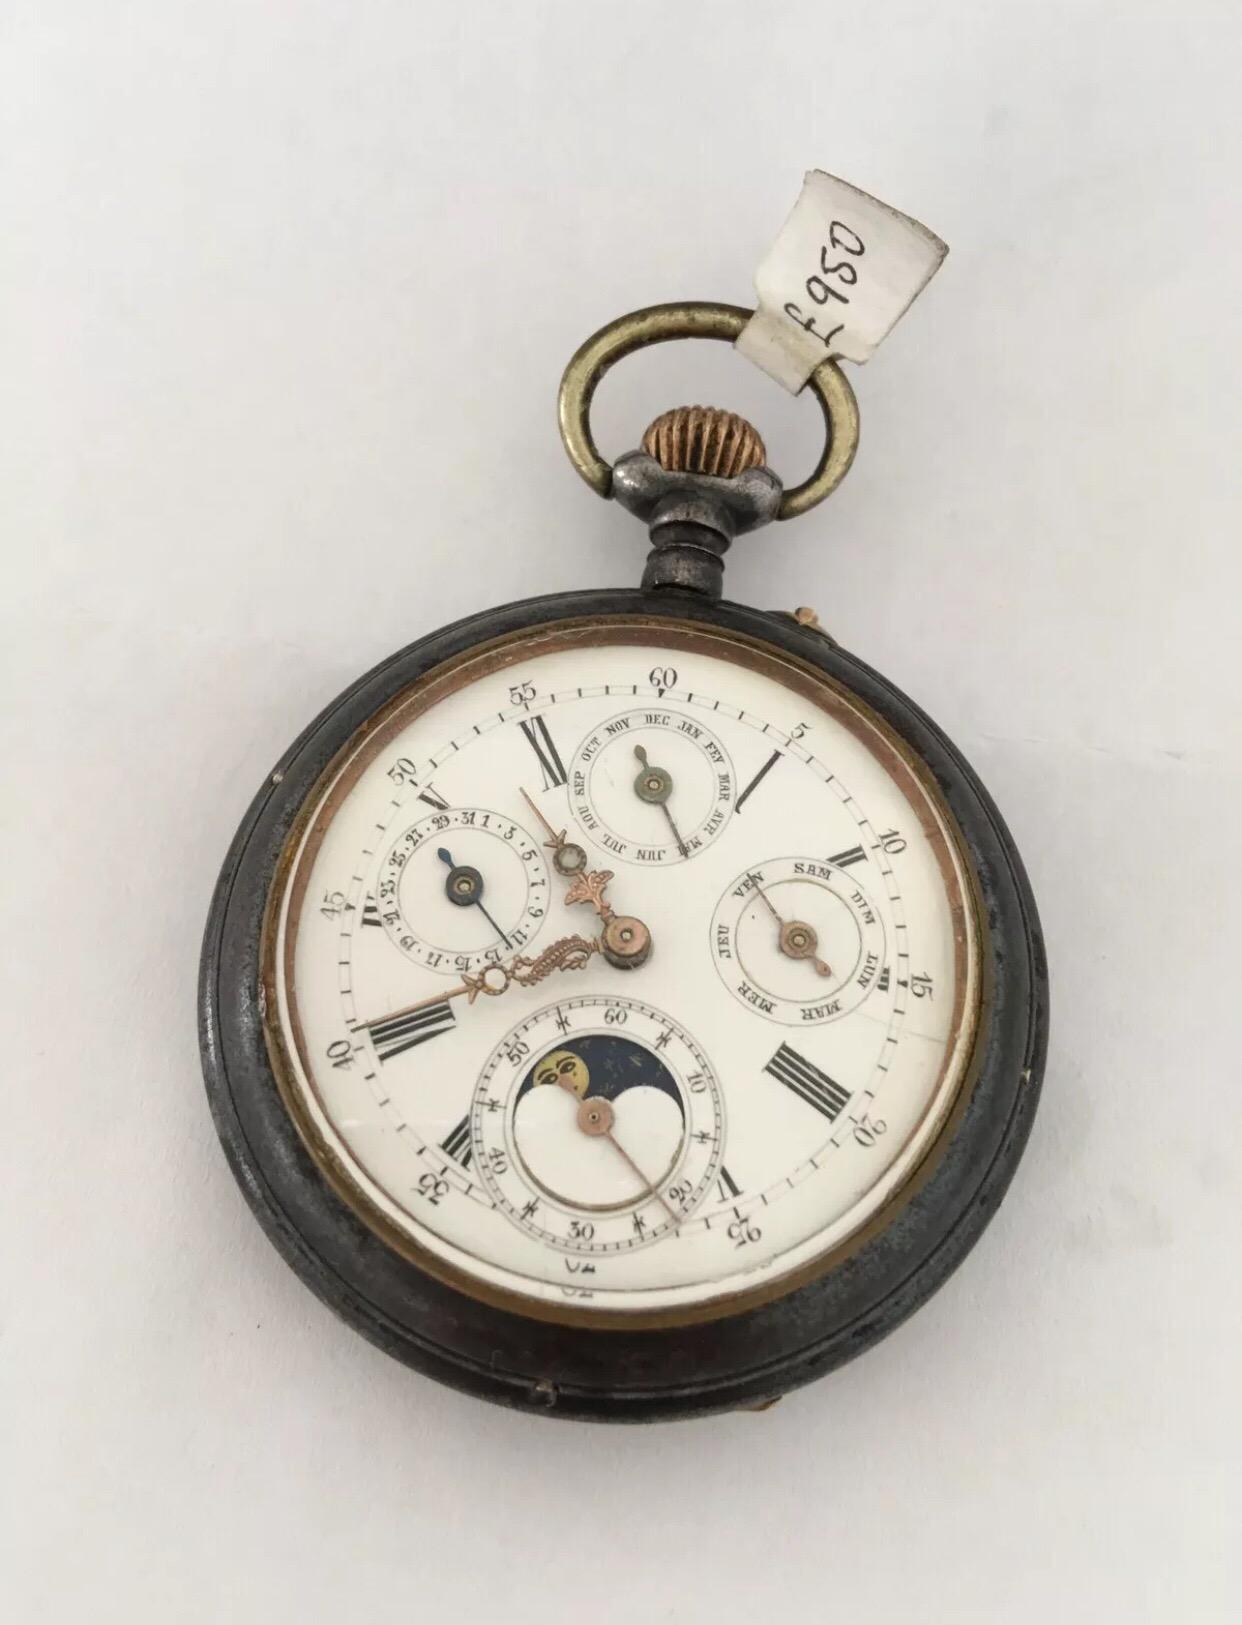 Antique Gunmetal & silver Perpetual Calendar Pocket Watch.


This pocket watch is in good working condition and is running well.